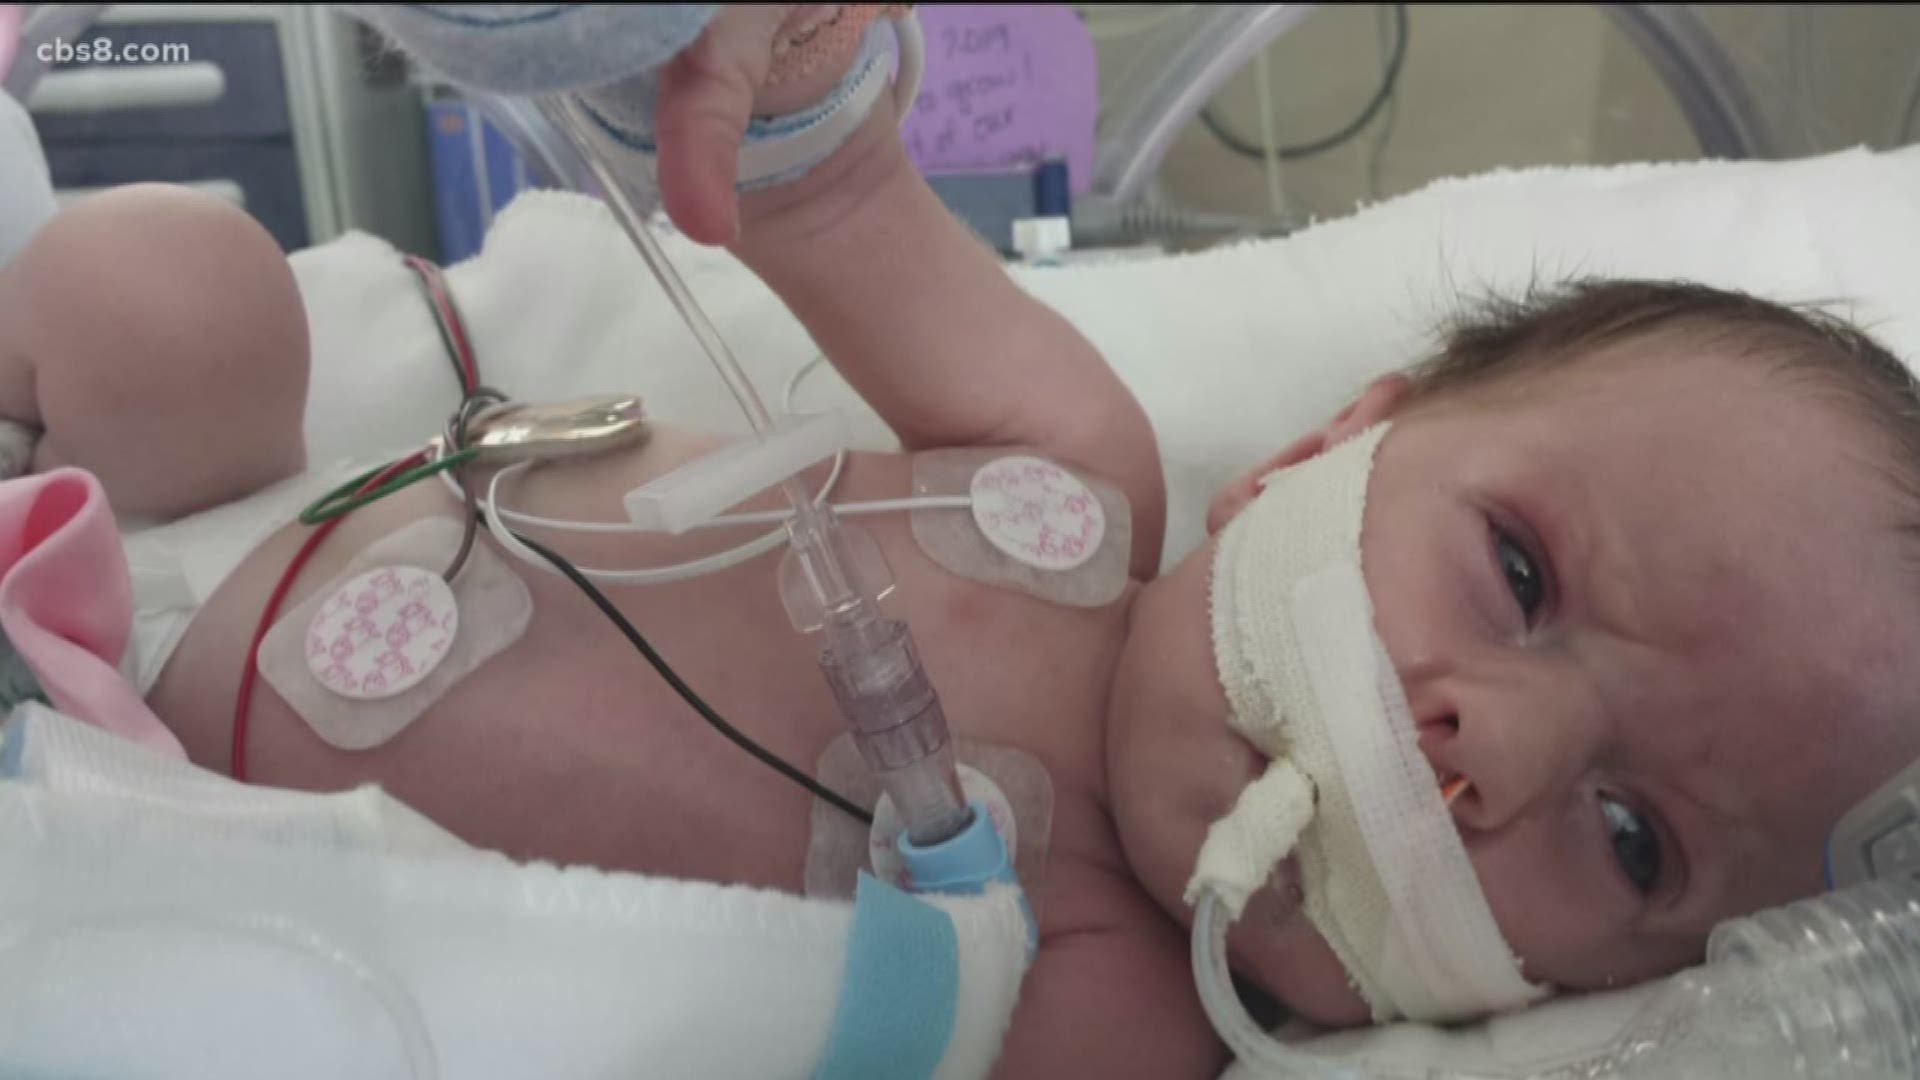 At just three weeks old, doctors at Rady Children’s Hospital performed a heart transplant on Eliana.